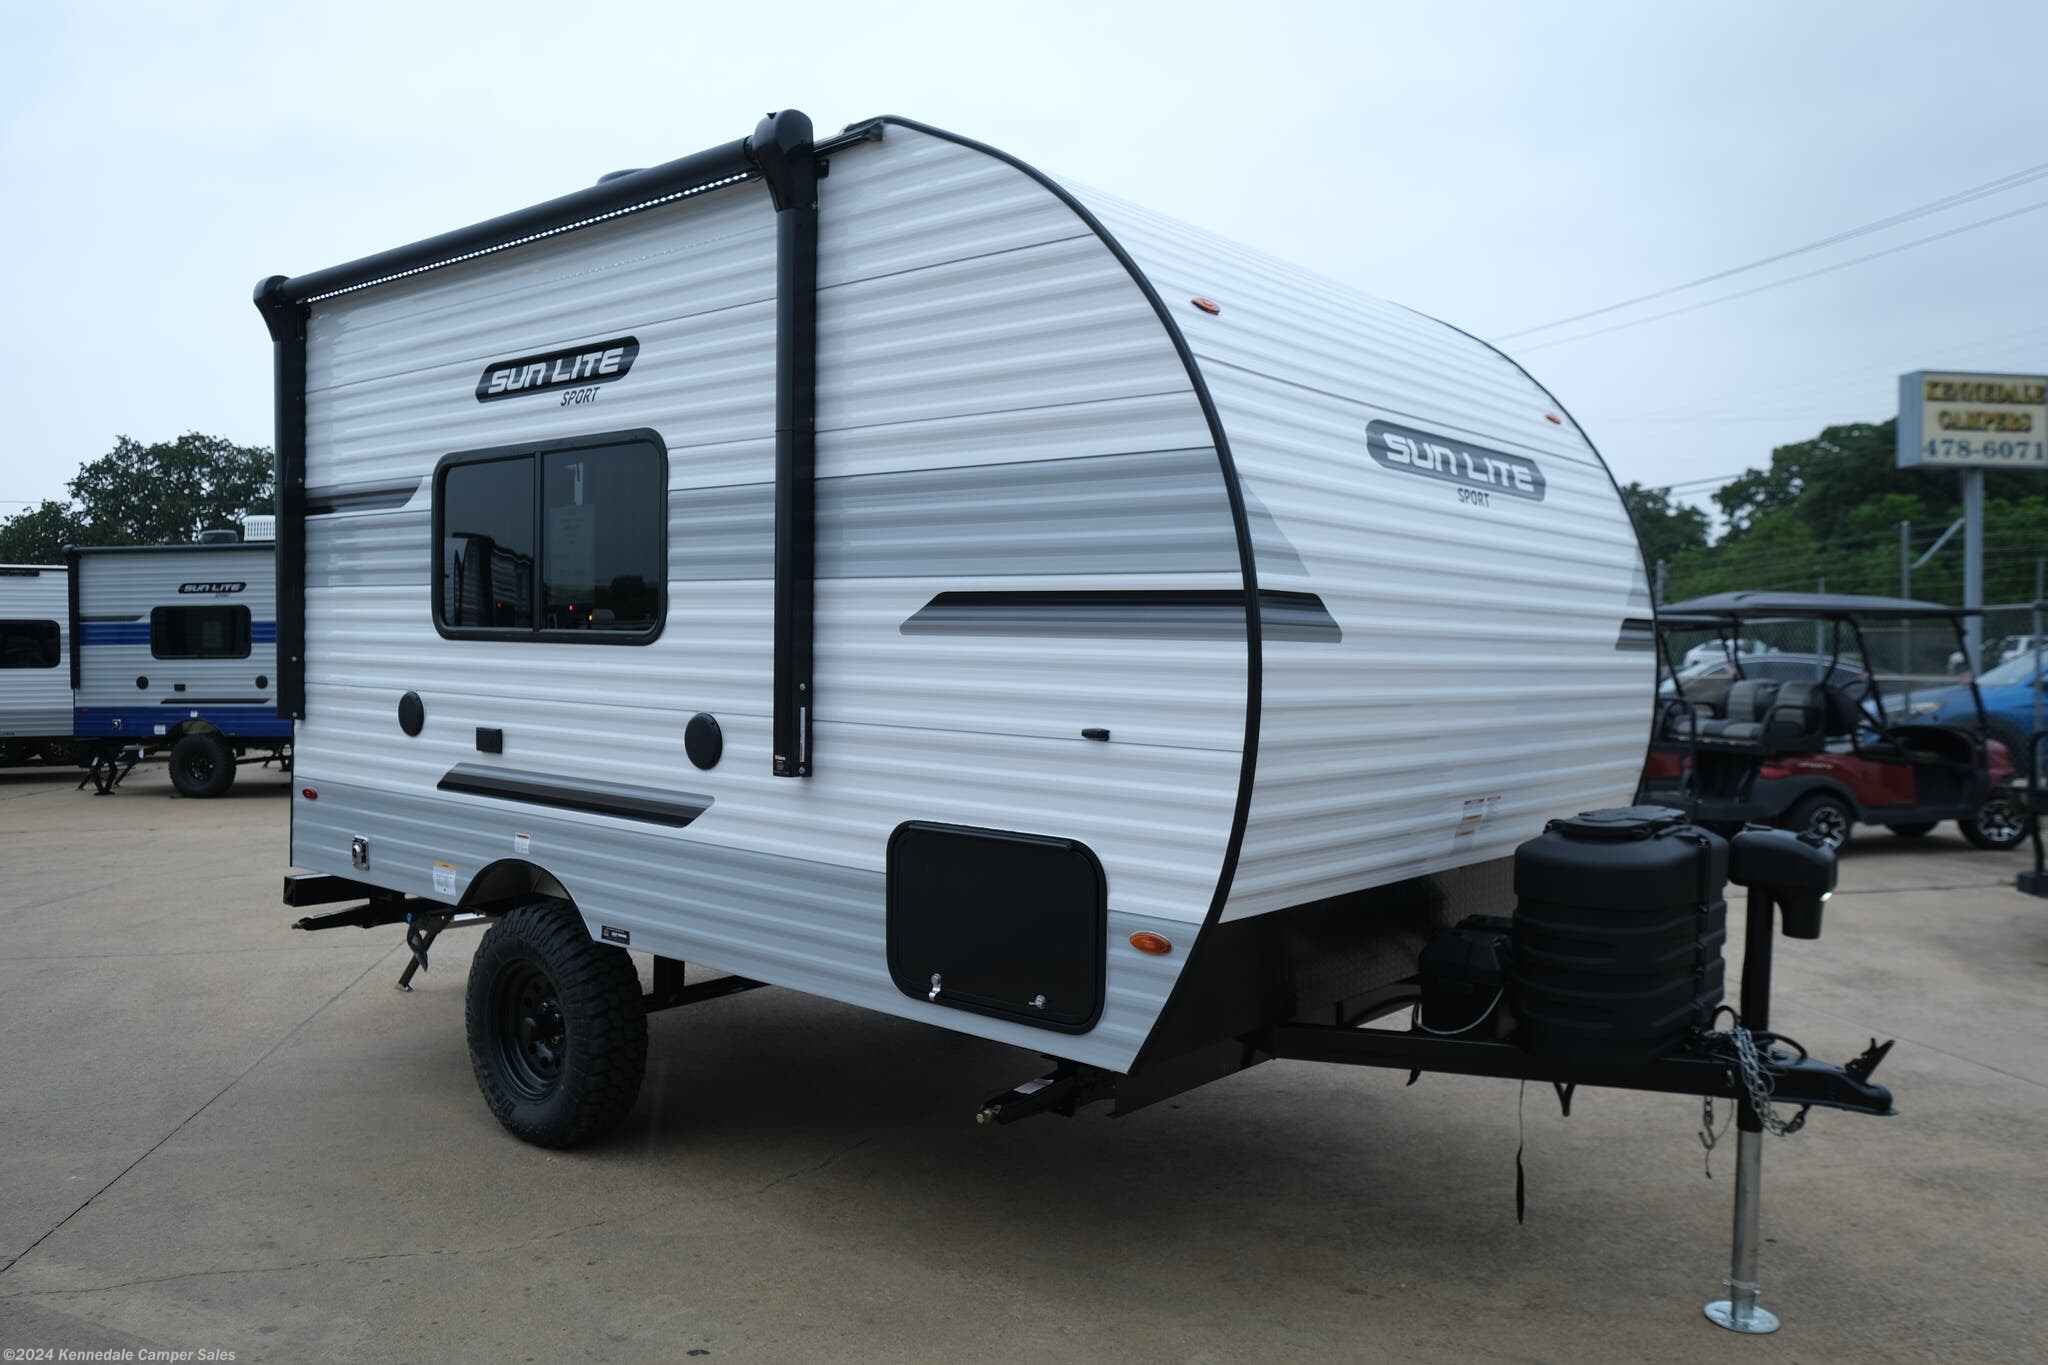 2024 Sunset Park RV Sun Lite 16BH RV for Sale in Kennedale, TX 76060, 009575